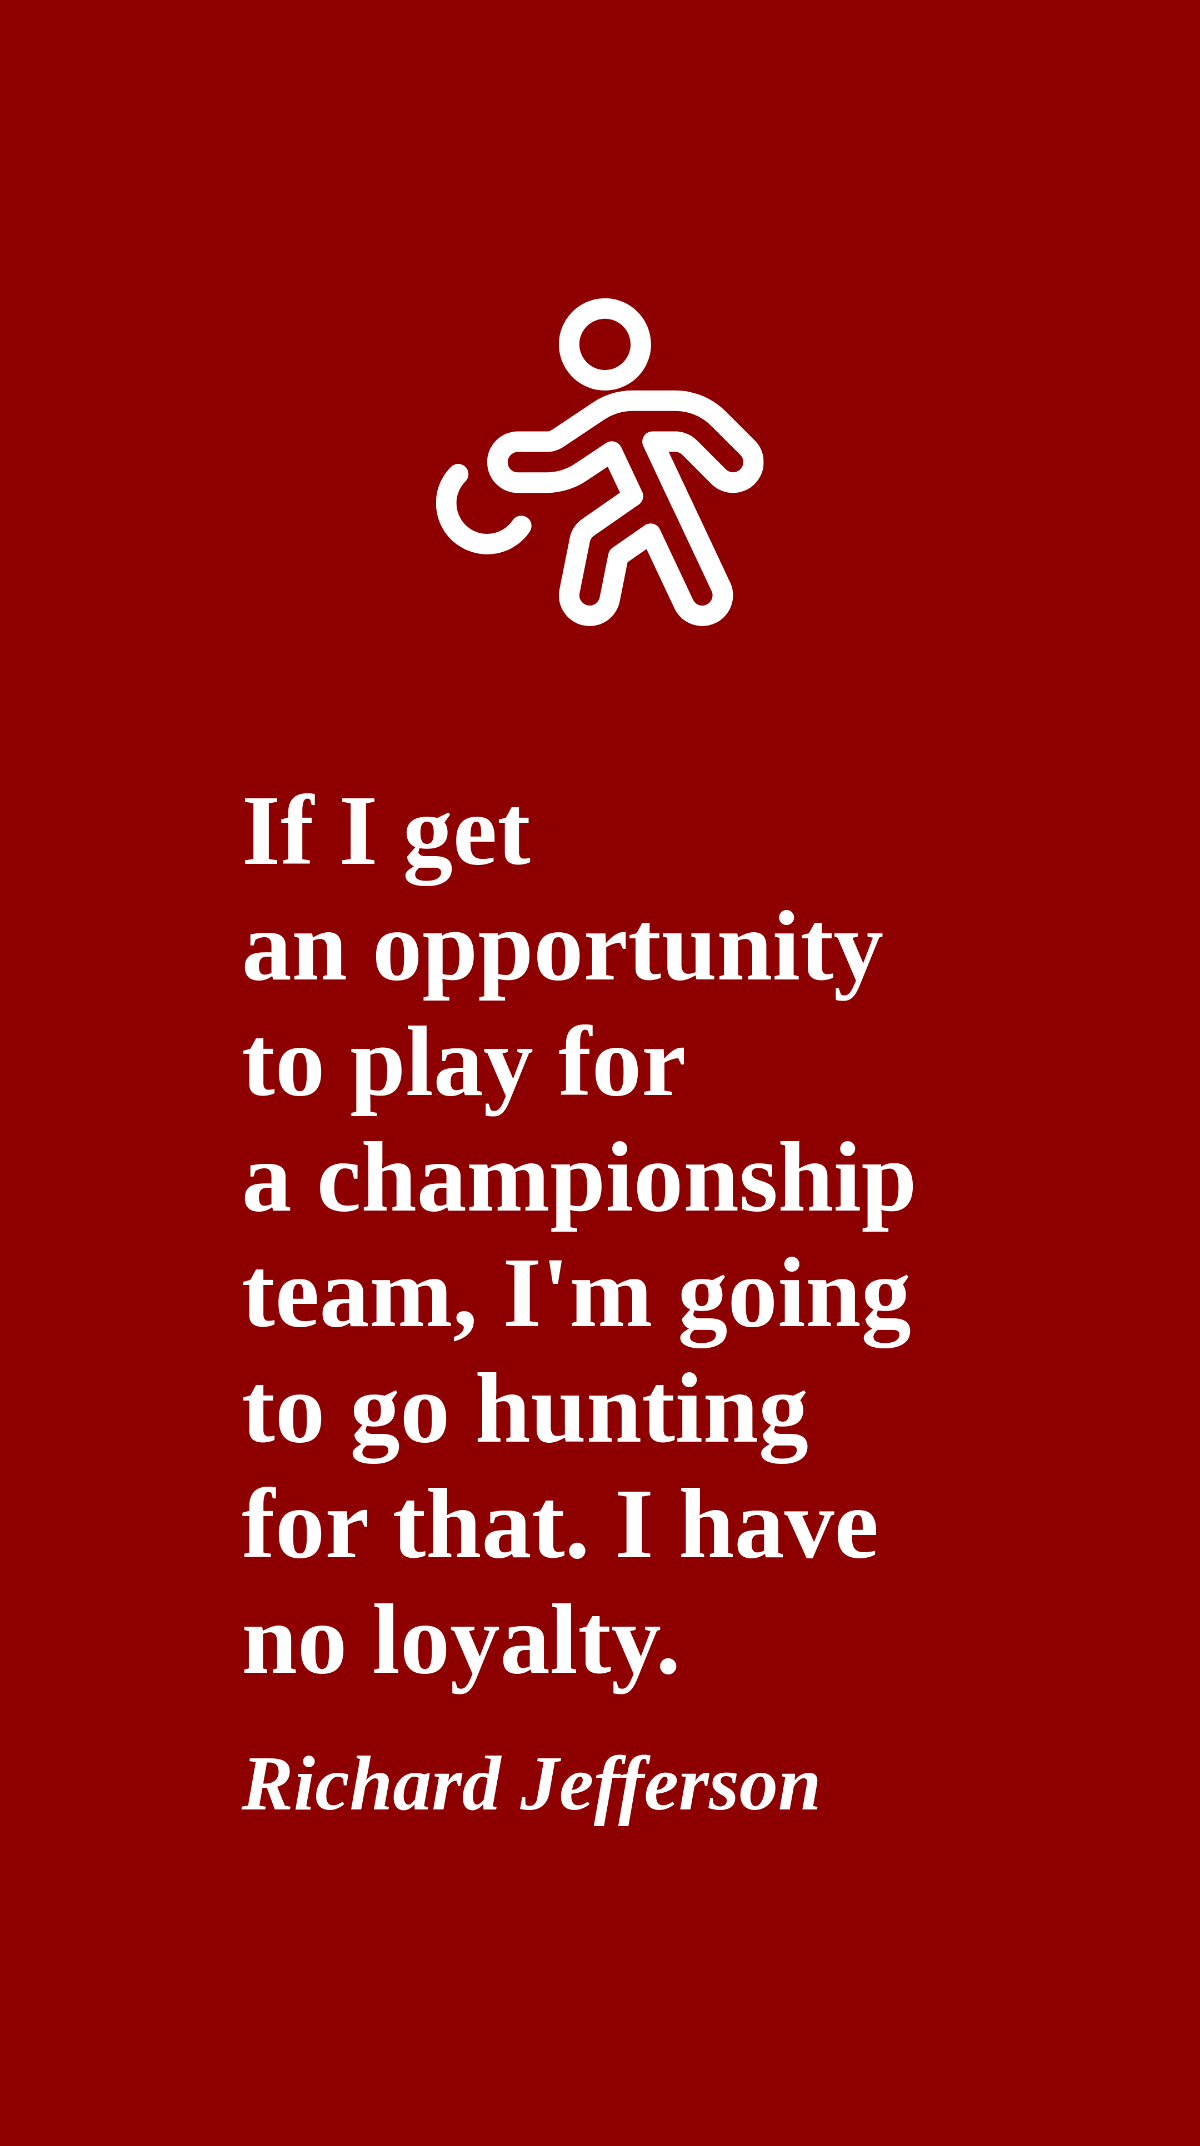 Richard Jefferson - If I get an opportunity to play for a championship team, I'm going to go hunting for that. I have no loyalty. Template